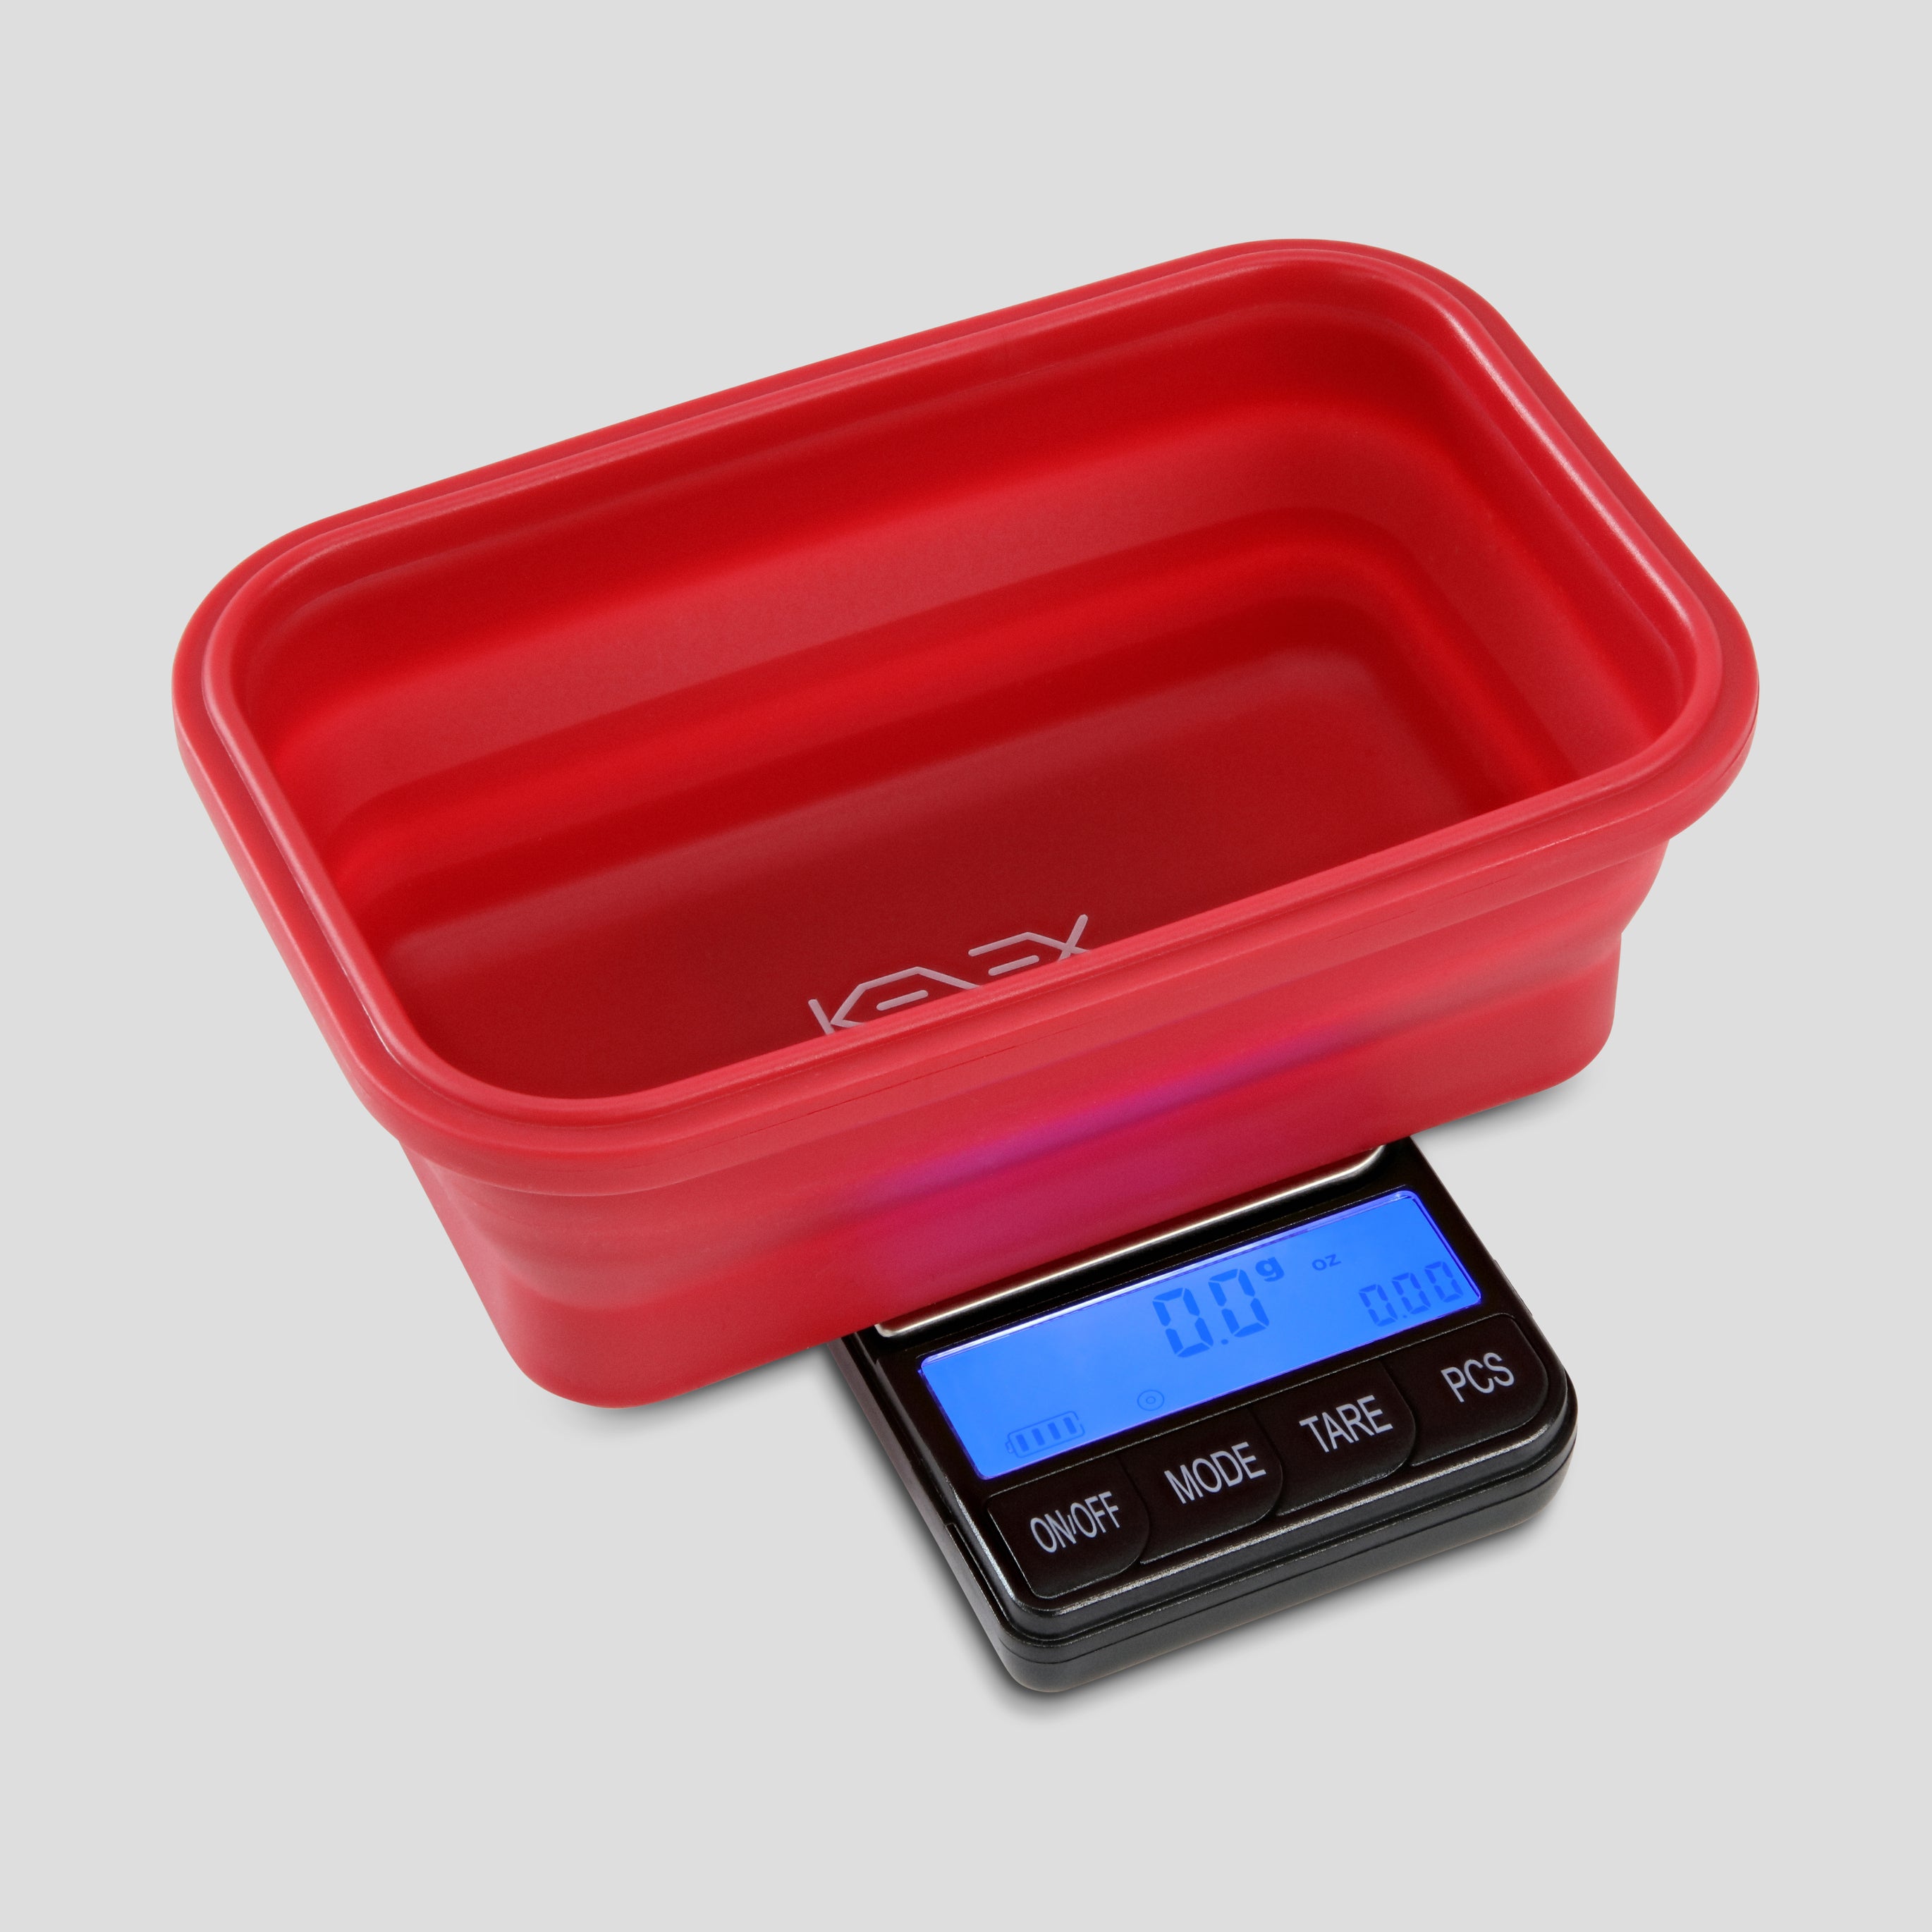 KITCHEN Scales by Kenex Omega, digital scales, pocket scales